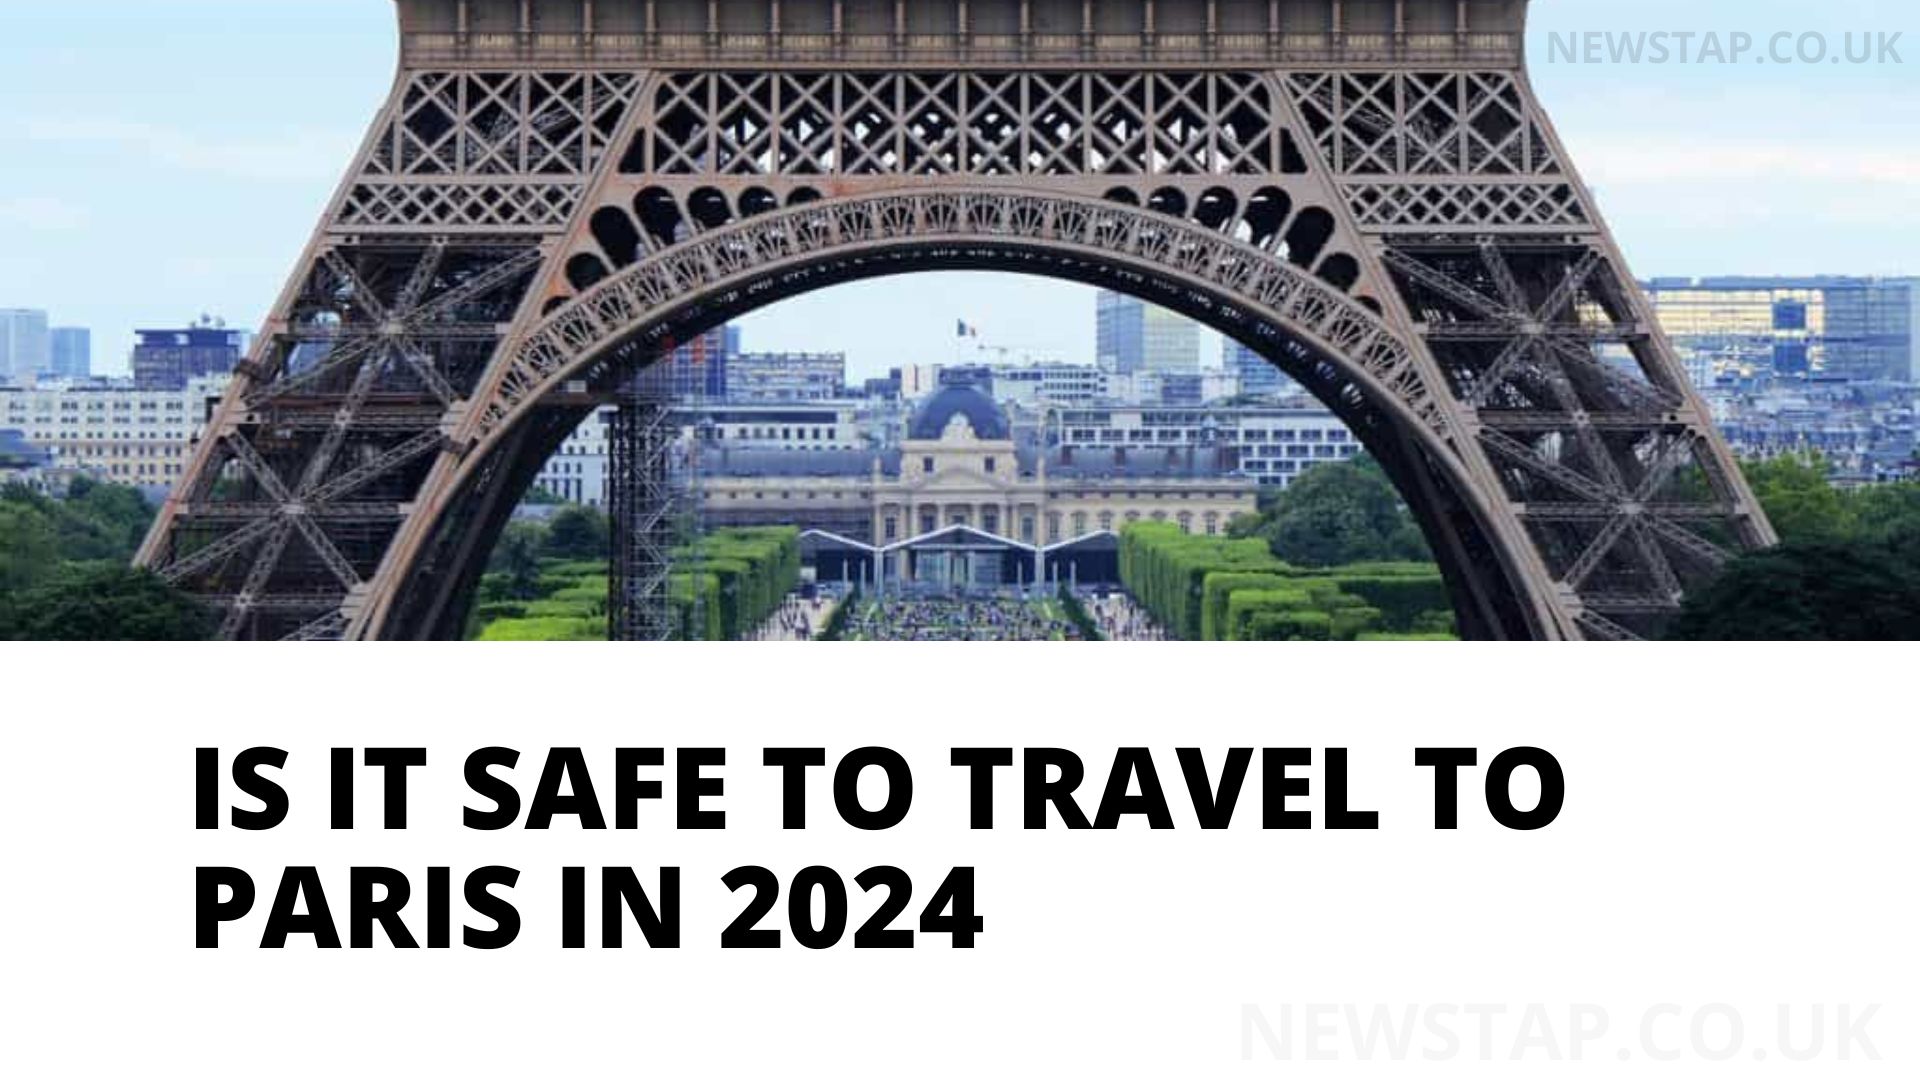 Is it safe to travel to Paris in 2024 - newstap.co.uk